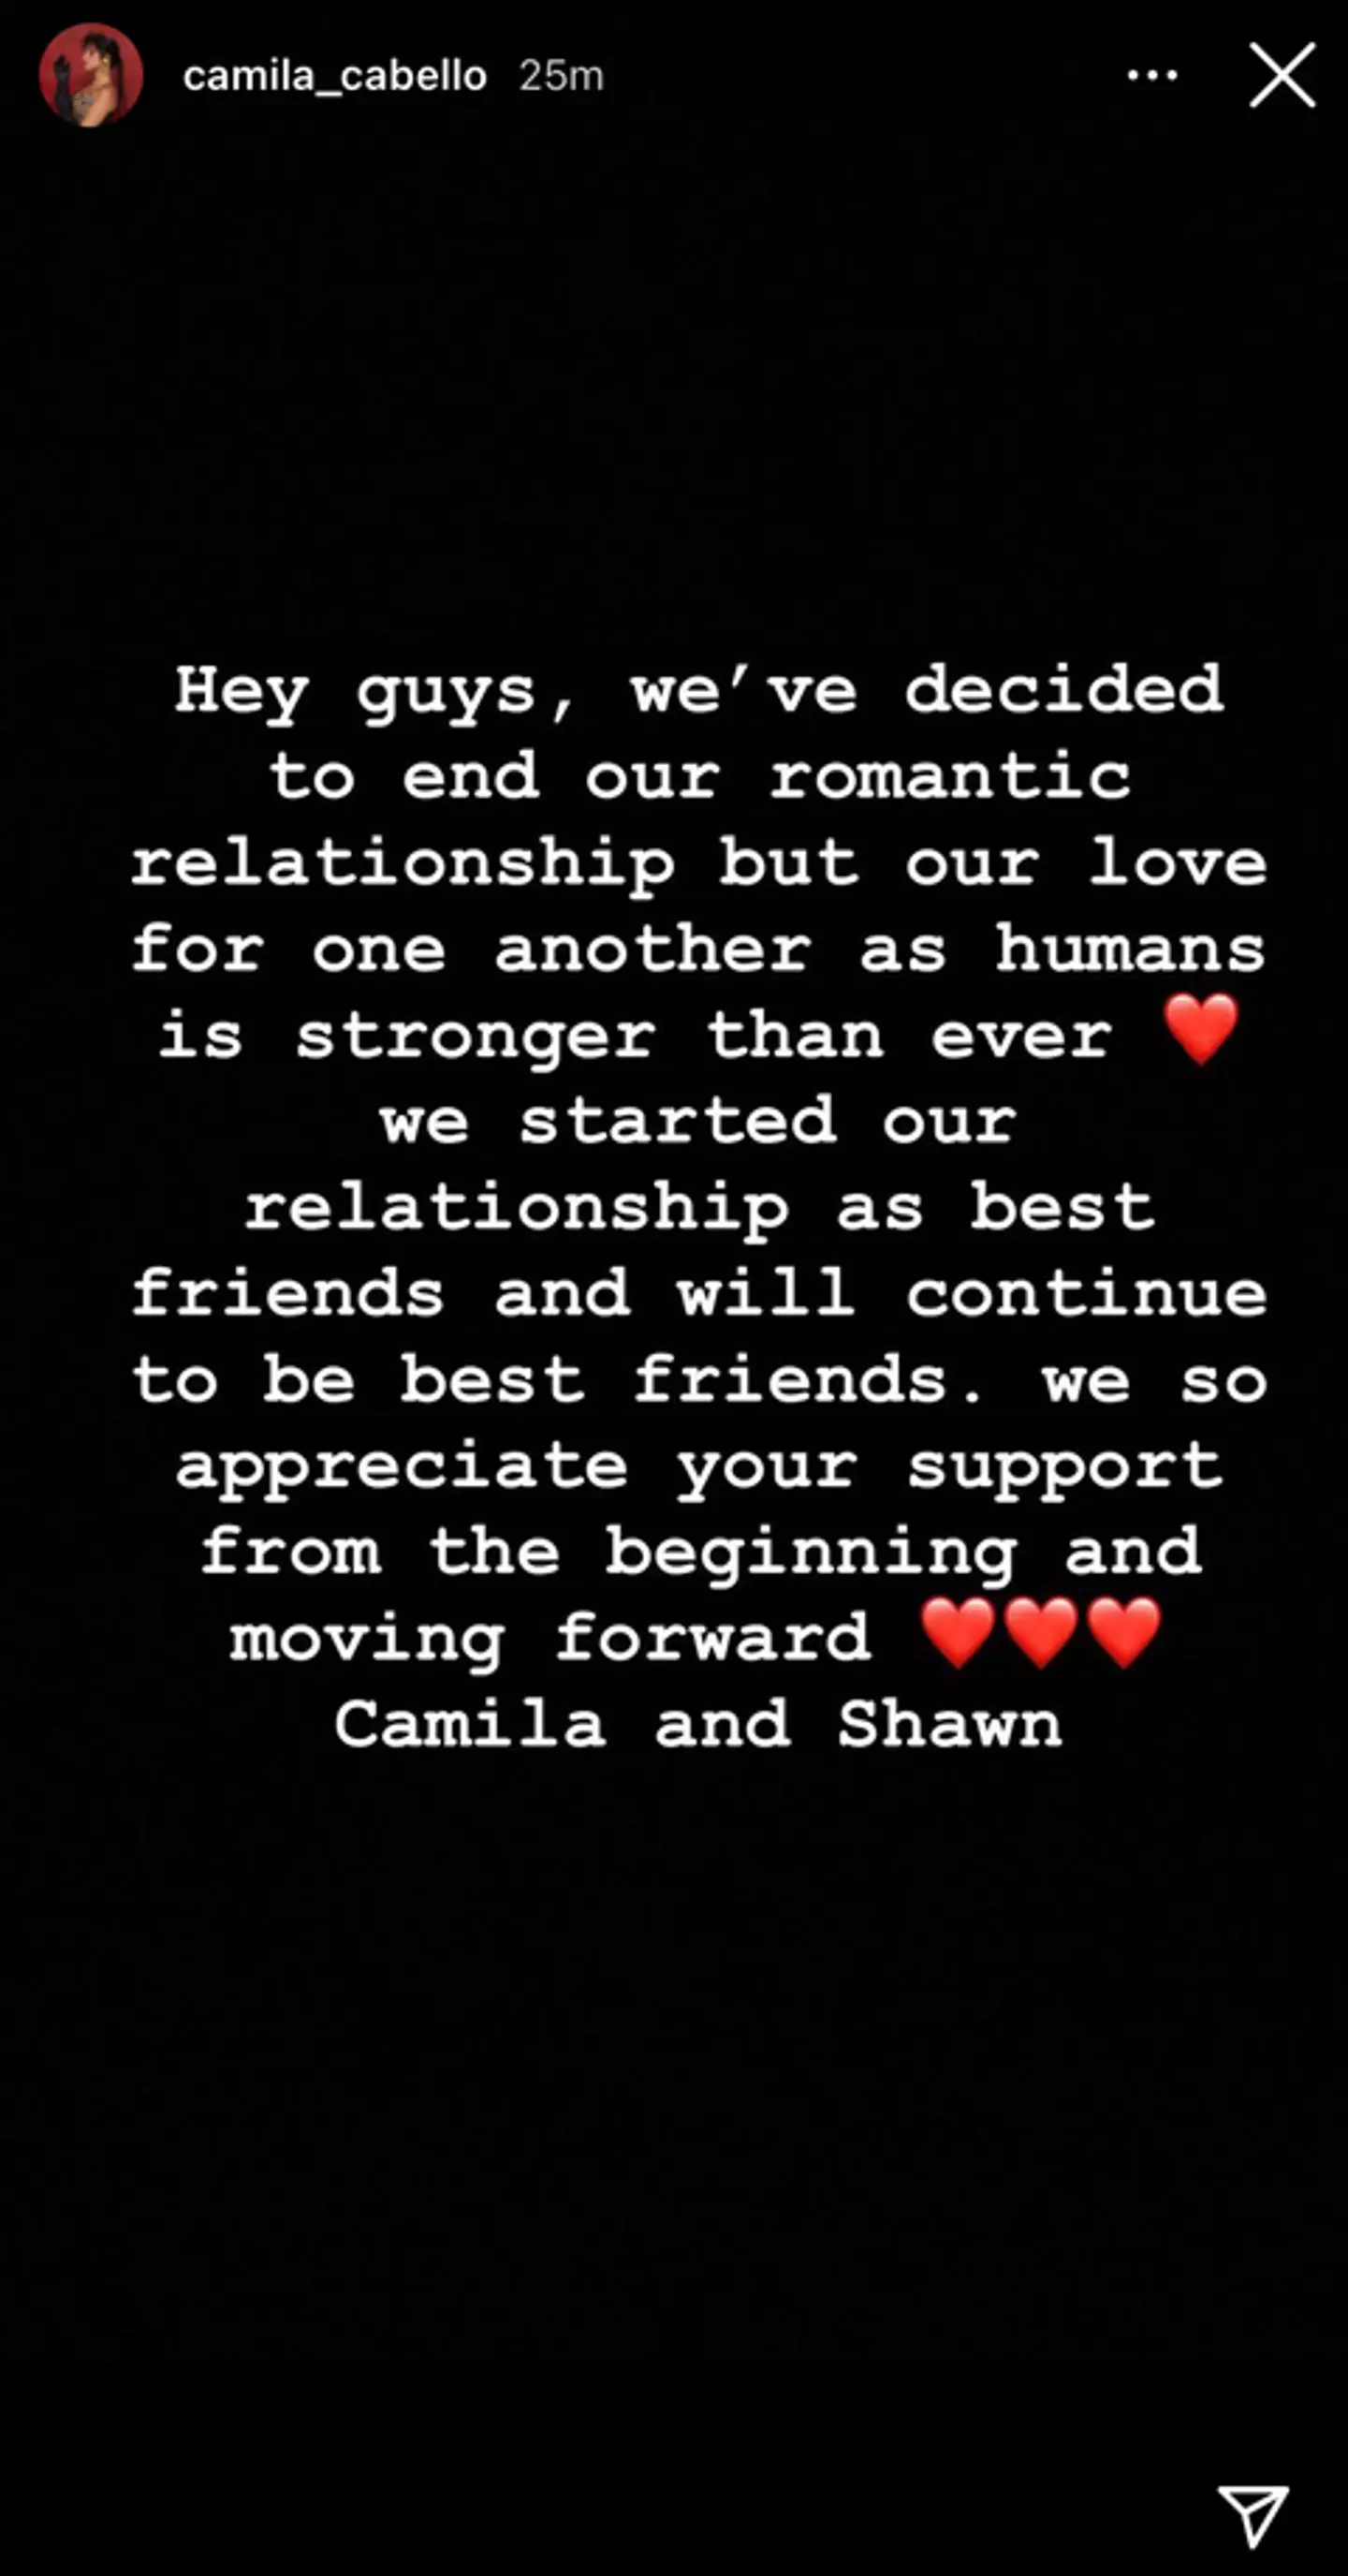 Back in November 2021, the couple of two years revealed on Instagram that they had ended their relationship (Instagram Camila Cabello).